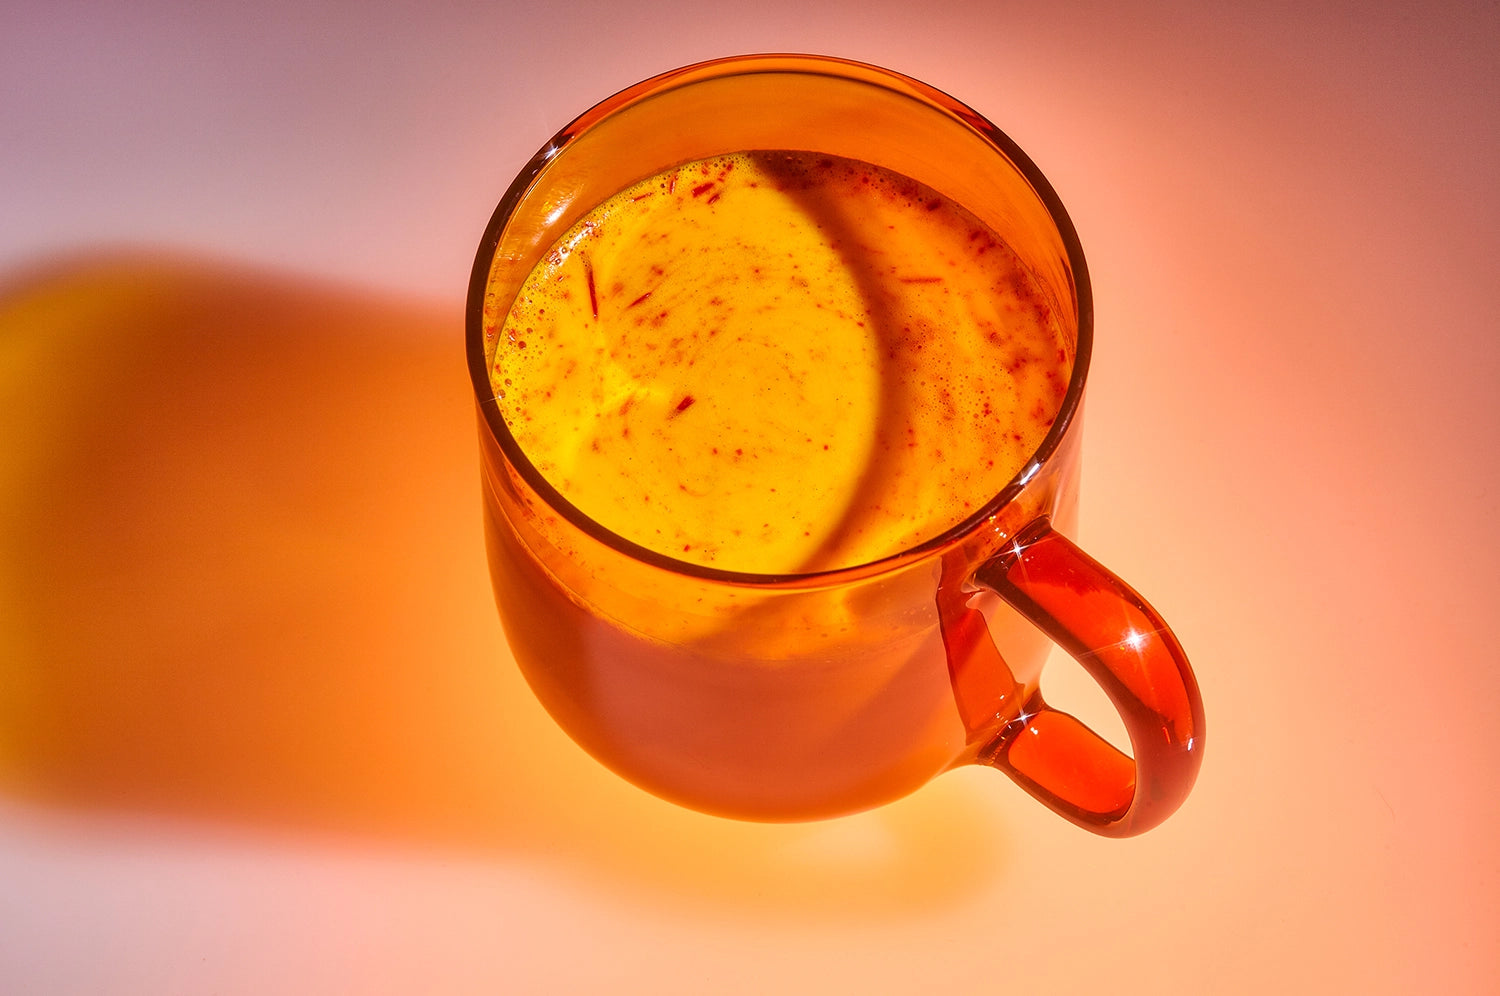 A clear orange hued mug filled with a golden-yellow saffron latte, enhanced with therapeutic-grade saffron from The Fullest, illuminated in warm light.